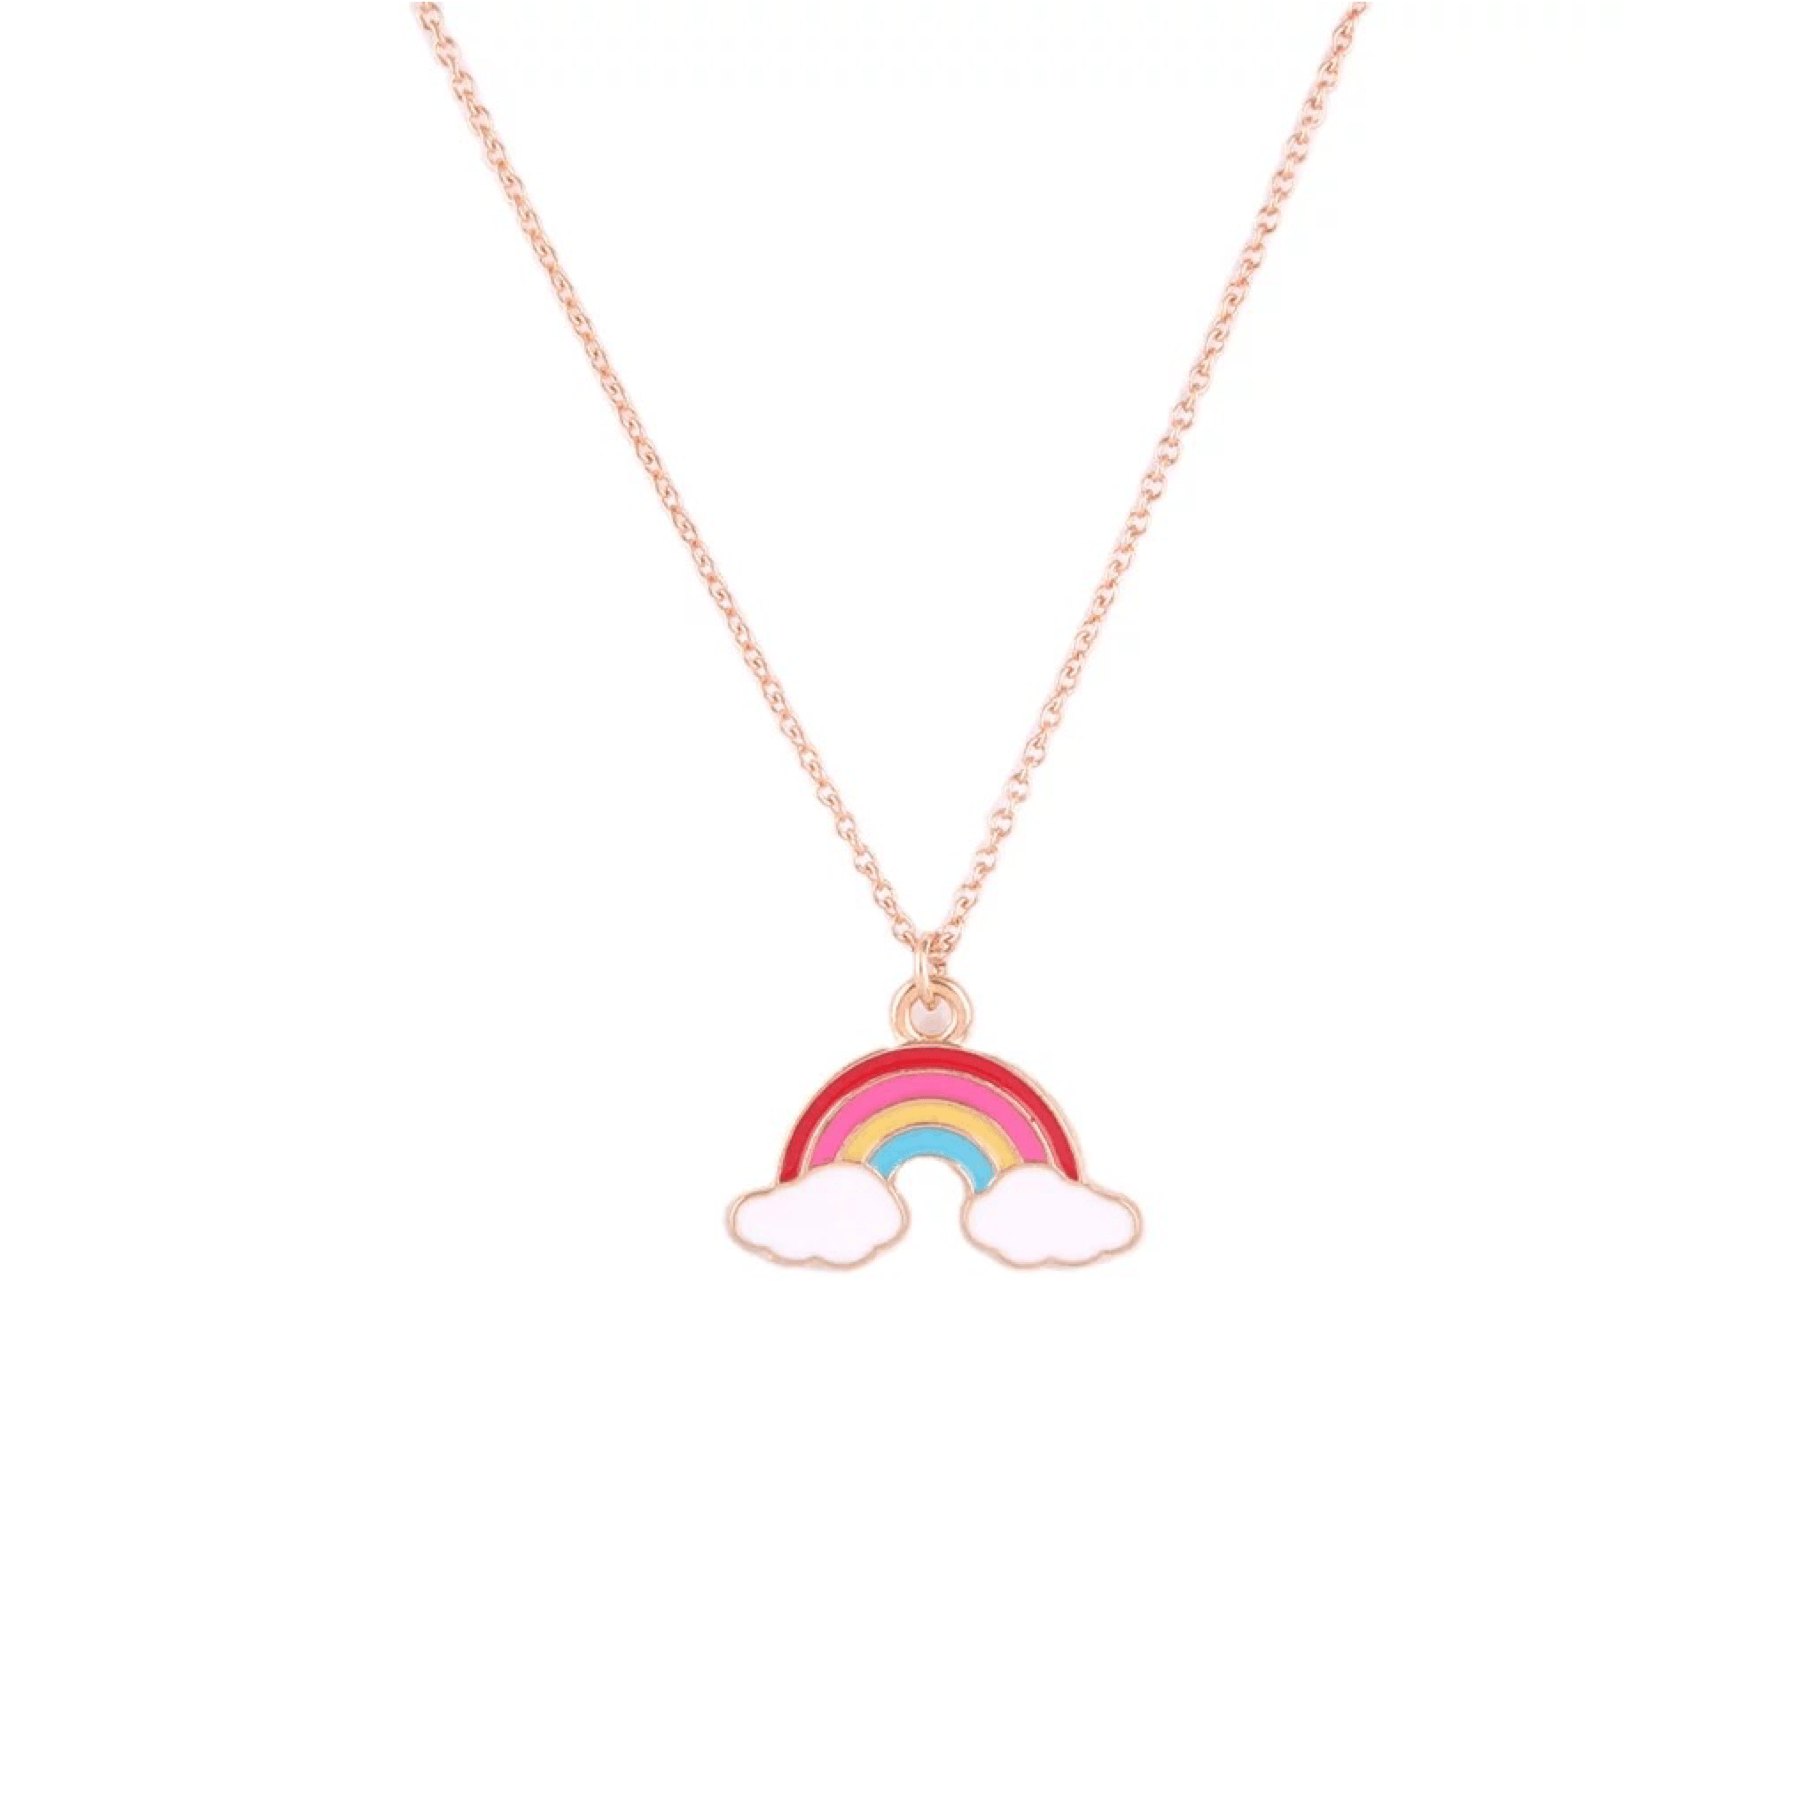 Rainbow Necklace Toys Not specified 